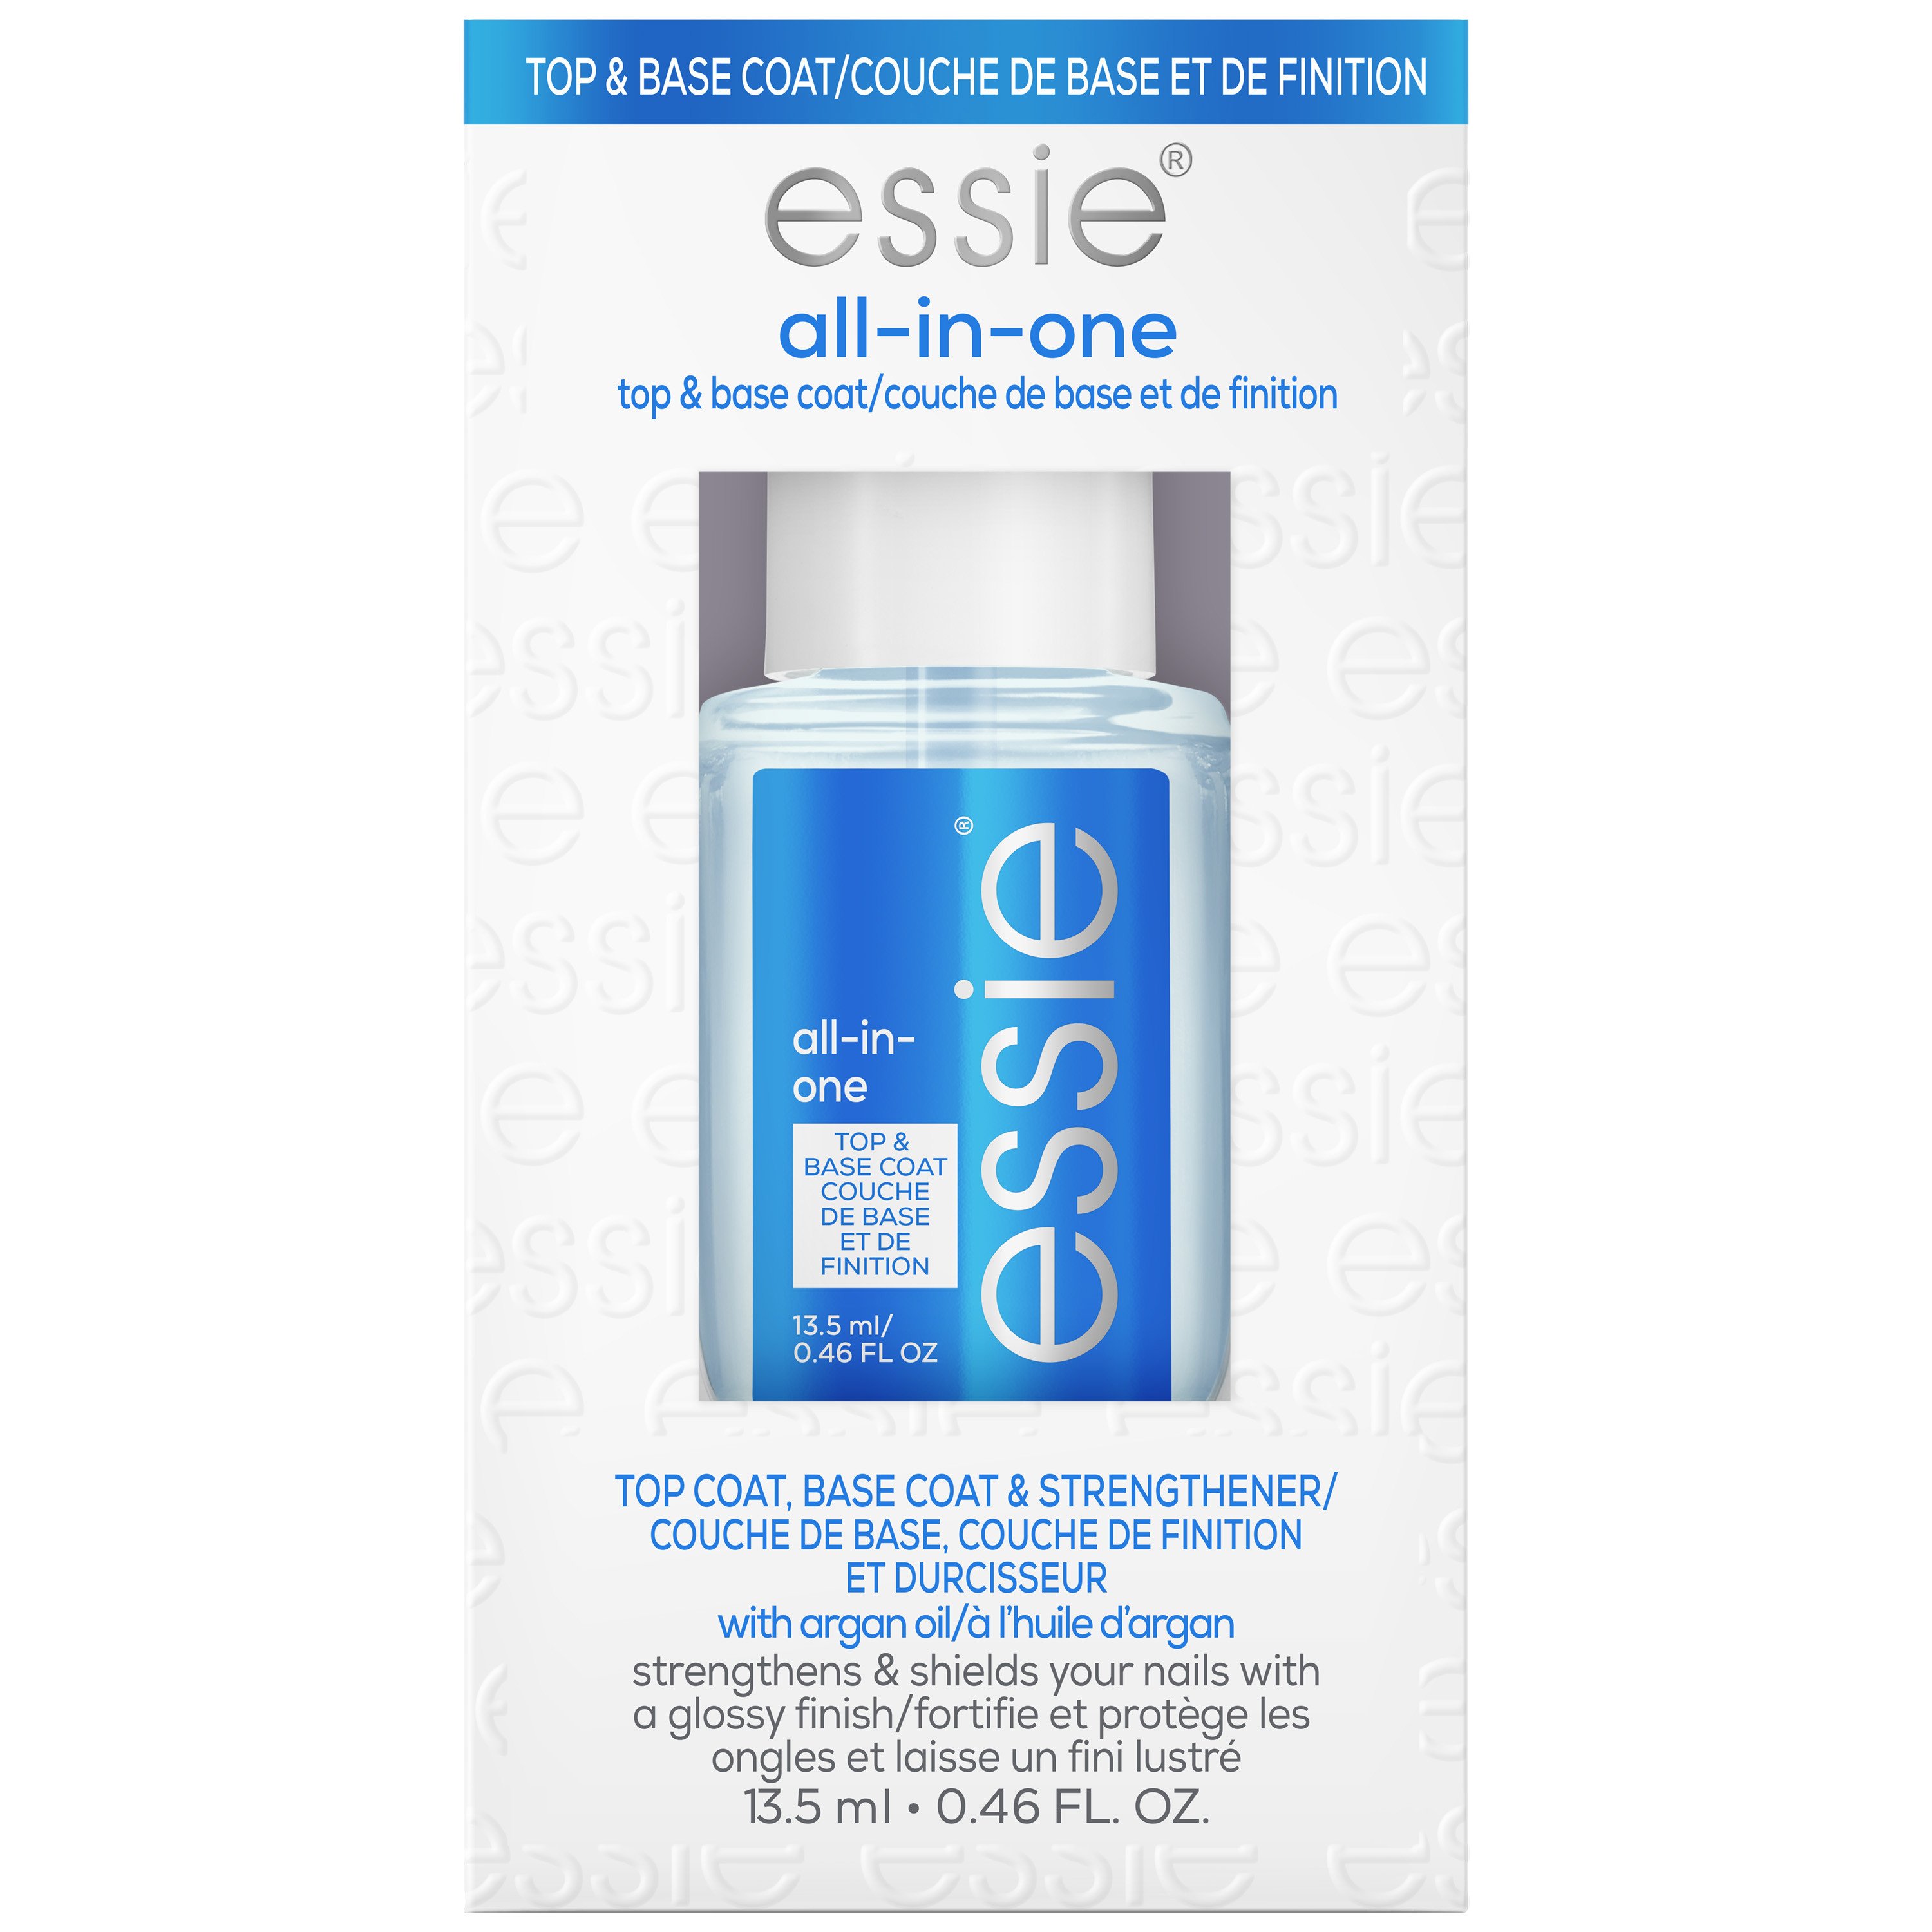 One at Strengthener Top - In H-E-B Treatments All Coat Shop + Nail + essie Treatment Base